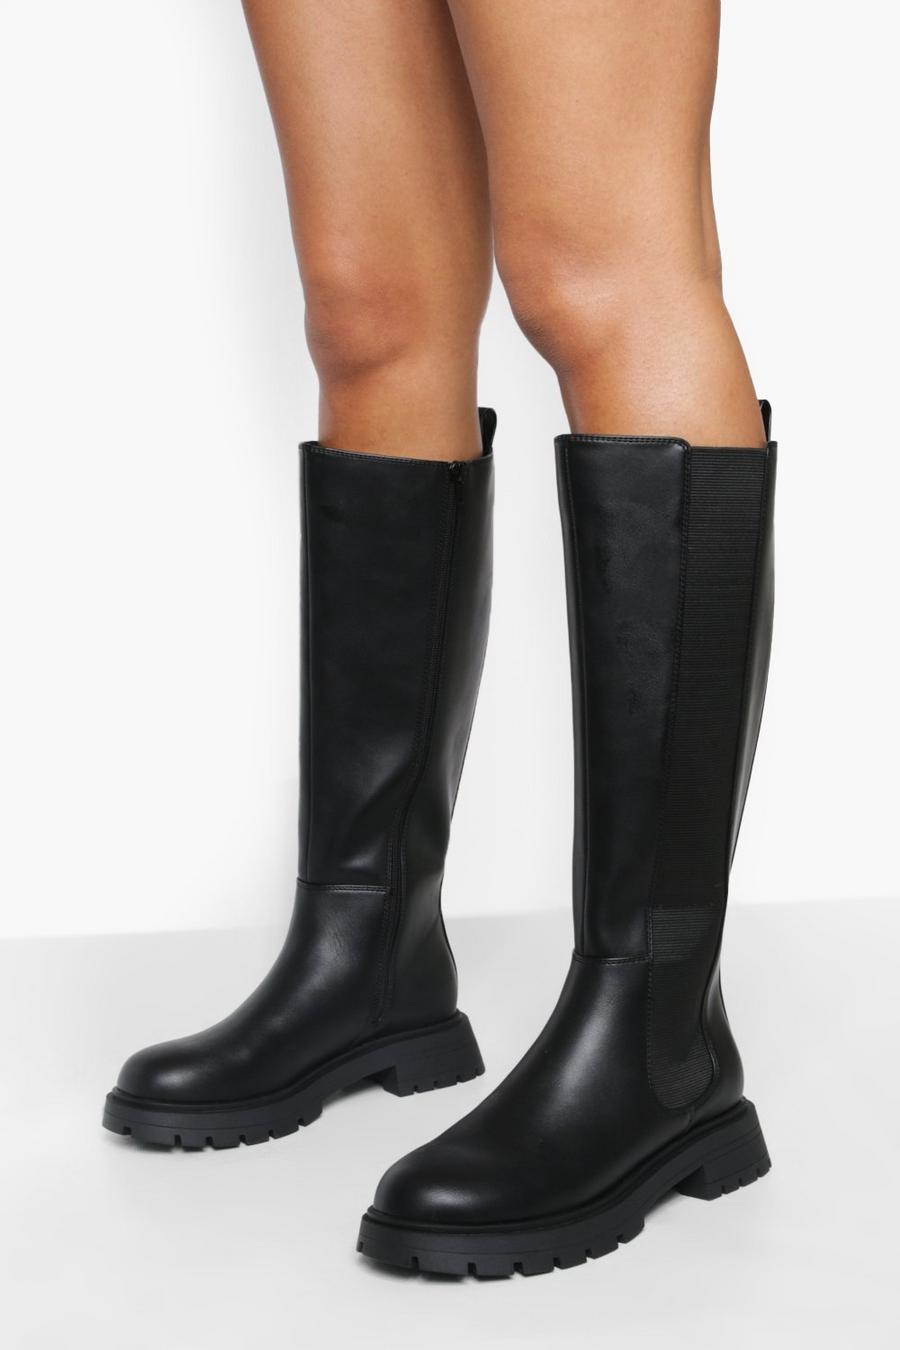 Black Knee High Chelsea Boots